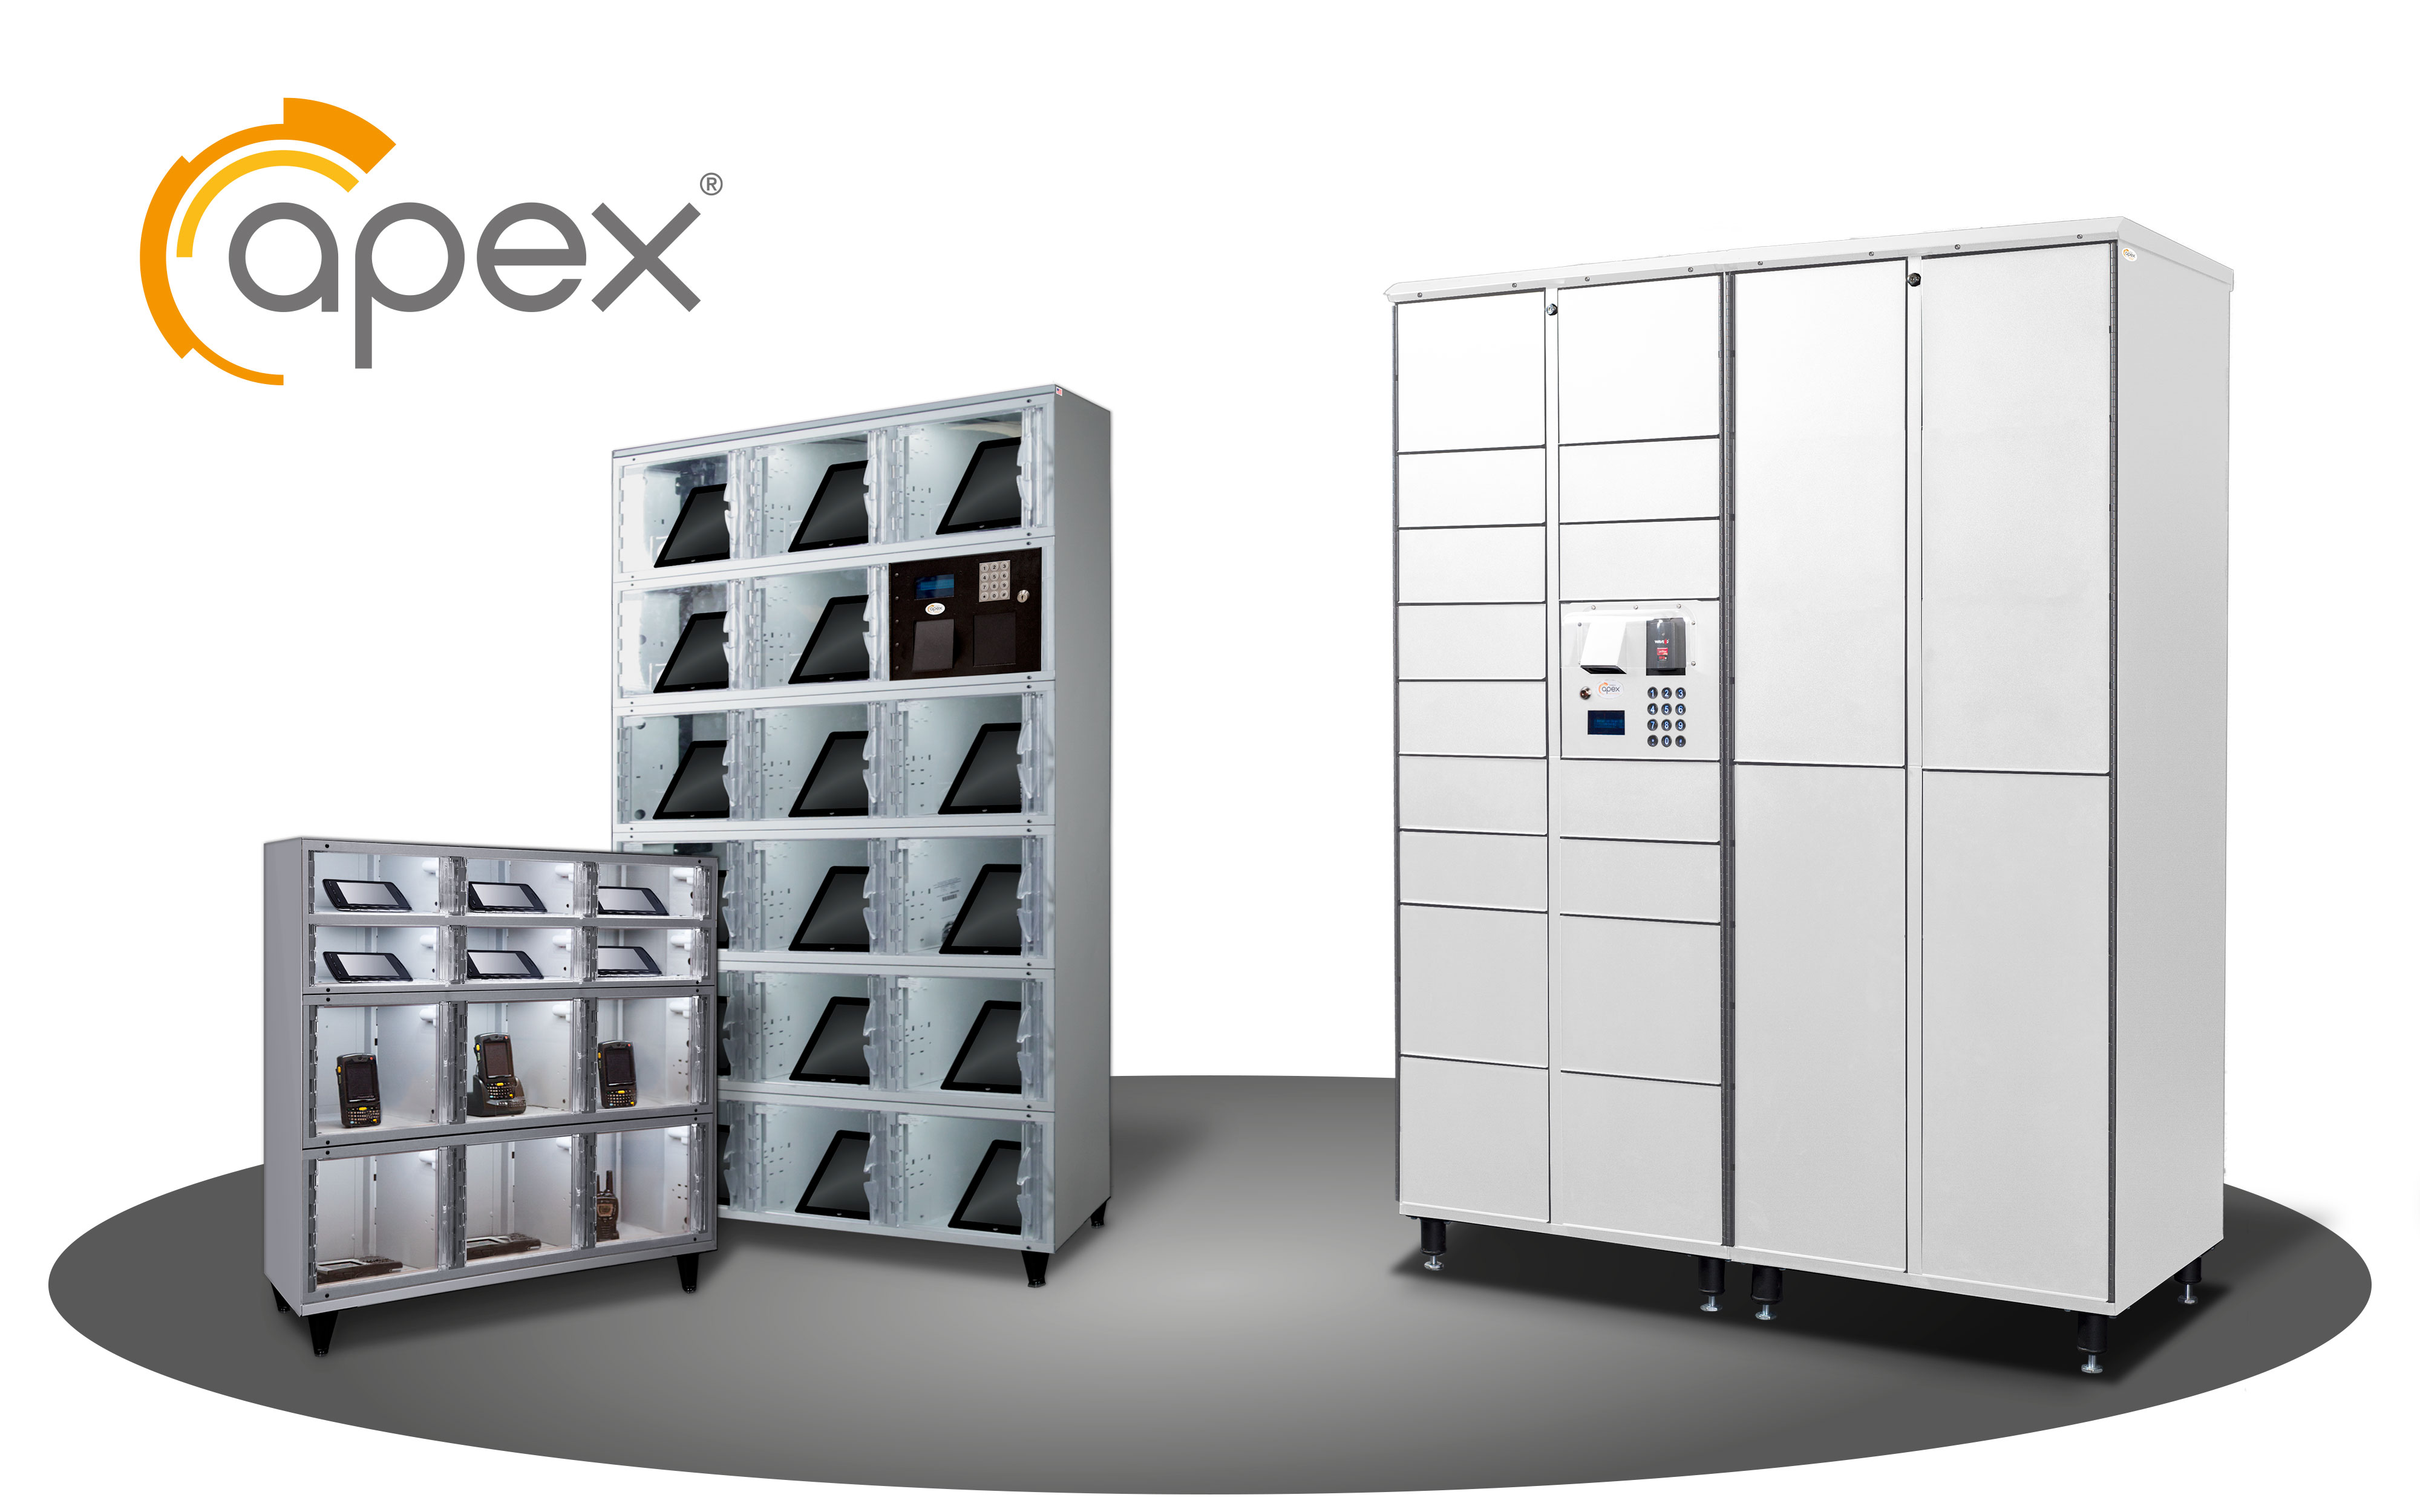 Ricoh grows Smart Locker capabilities with acquisition of Apex’s European business